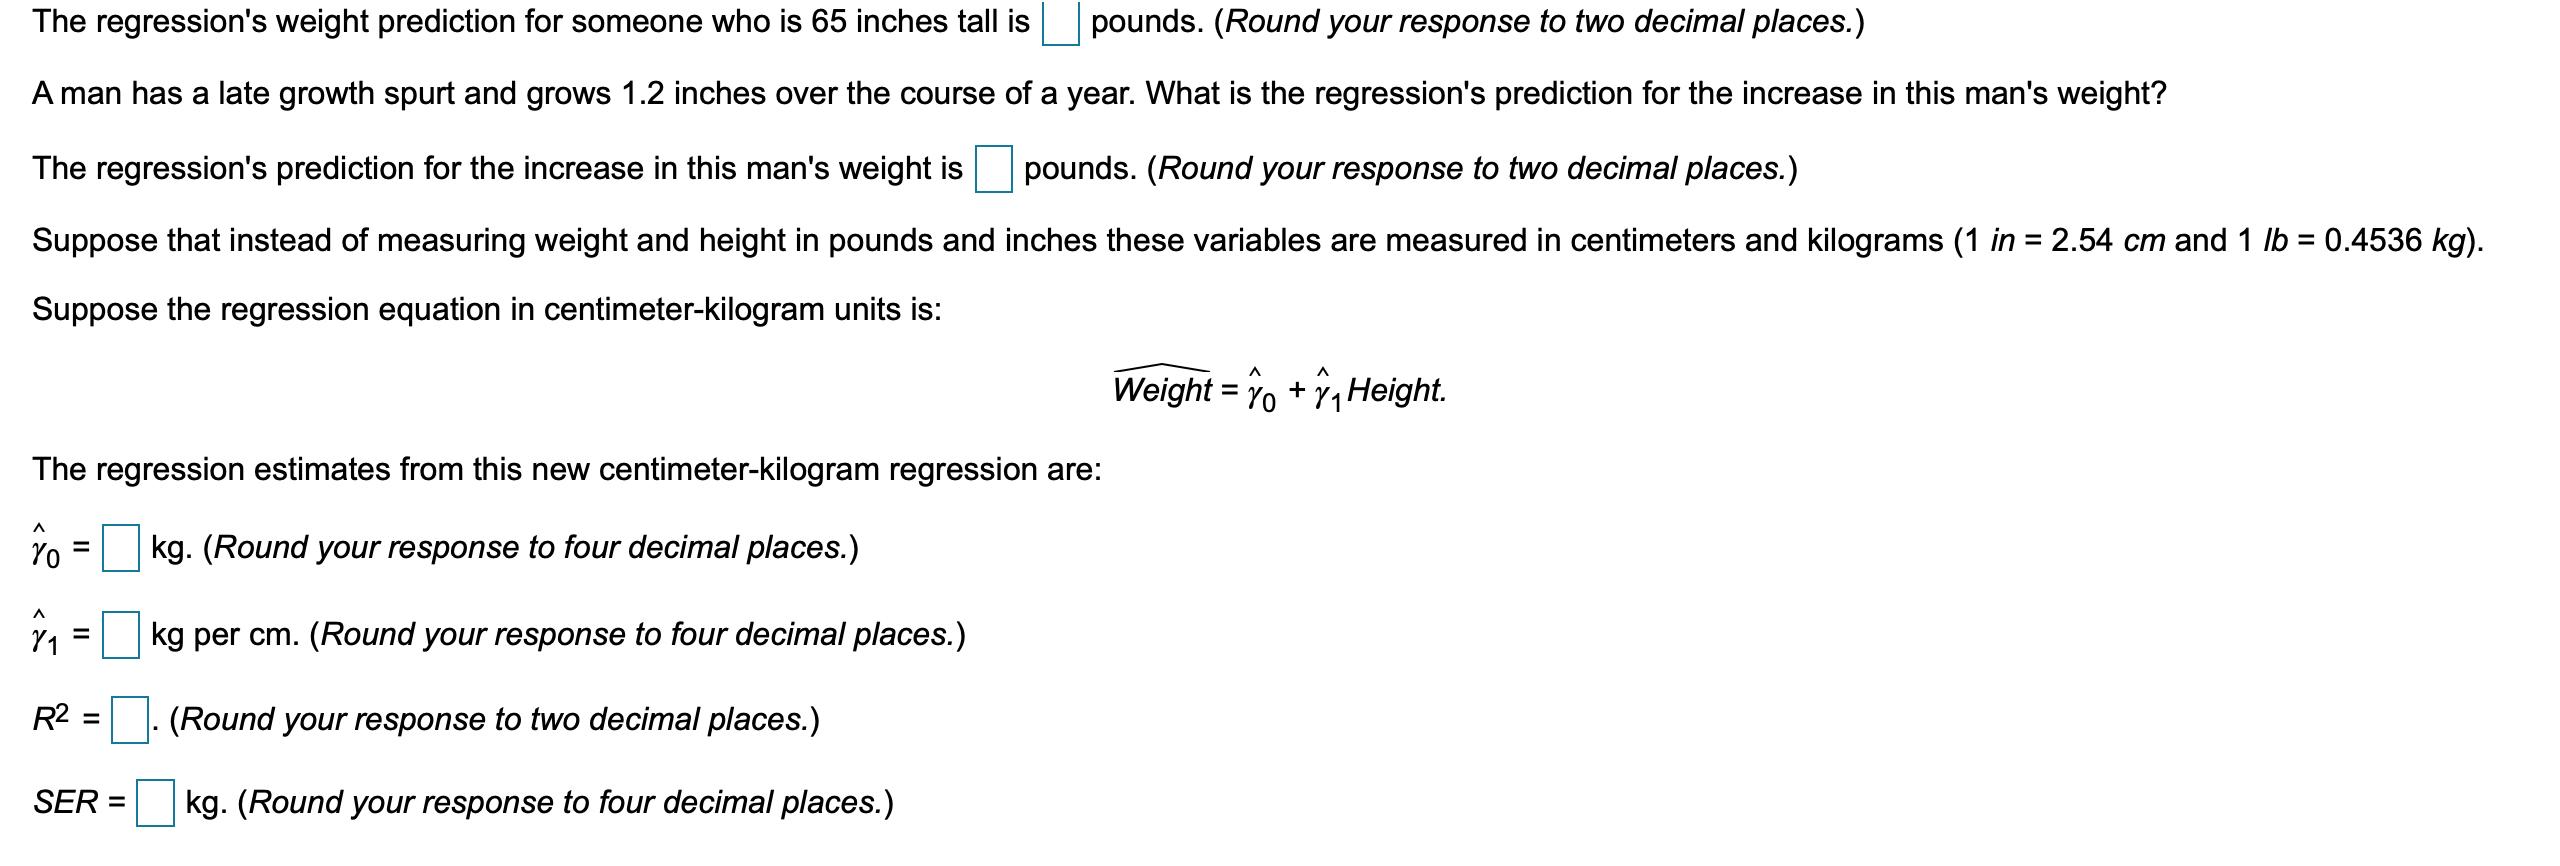 The regressions weight prediction for someone who is 65 inches tall is pounds. (Round your response to two decimal places.)